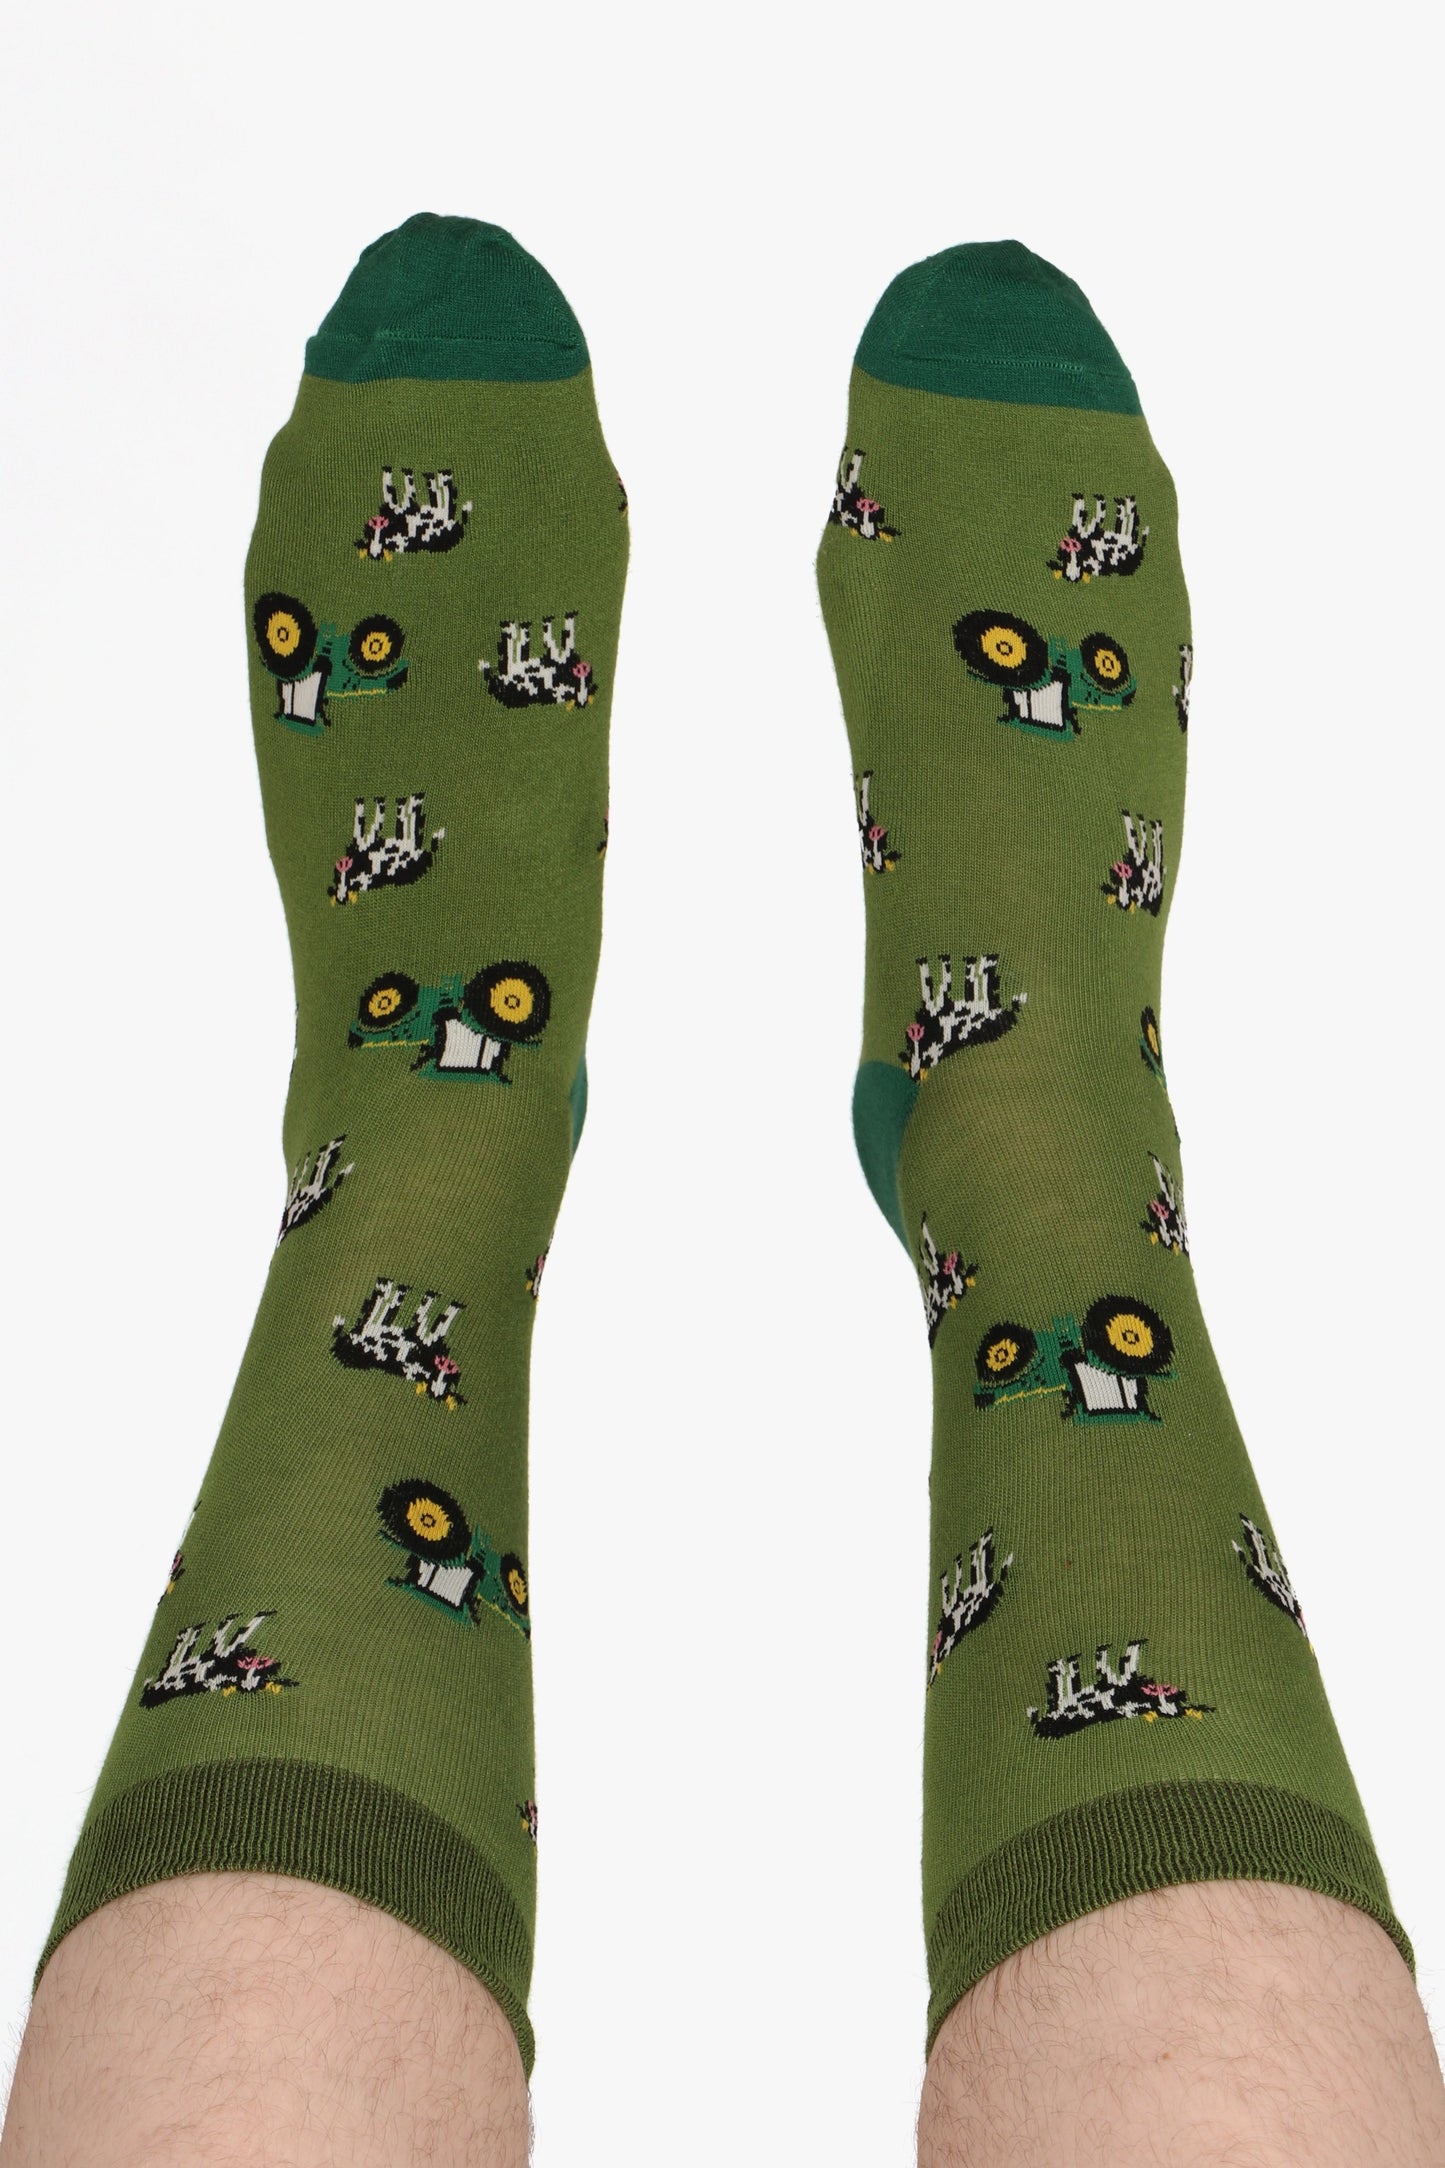 Mne's bamboo socks in tractor and cow print. Socks are in green tones. Male models feet are in the air